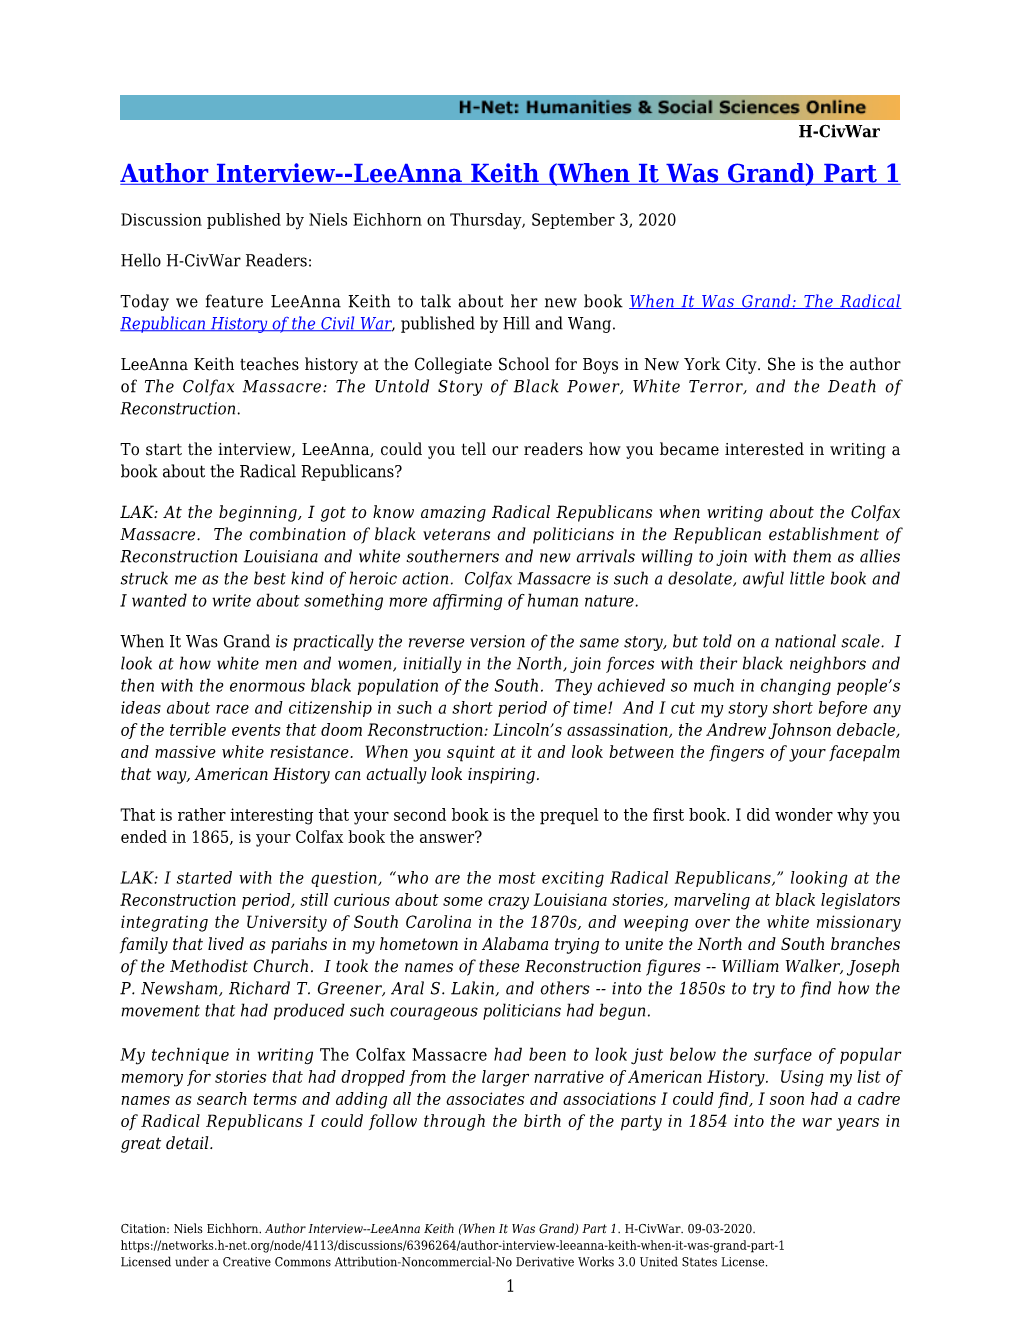 Author Interview--Leeanna Keith (When It Was Grand) Part 1